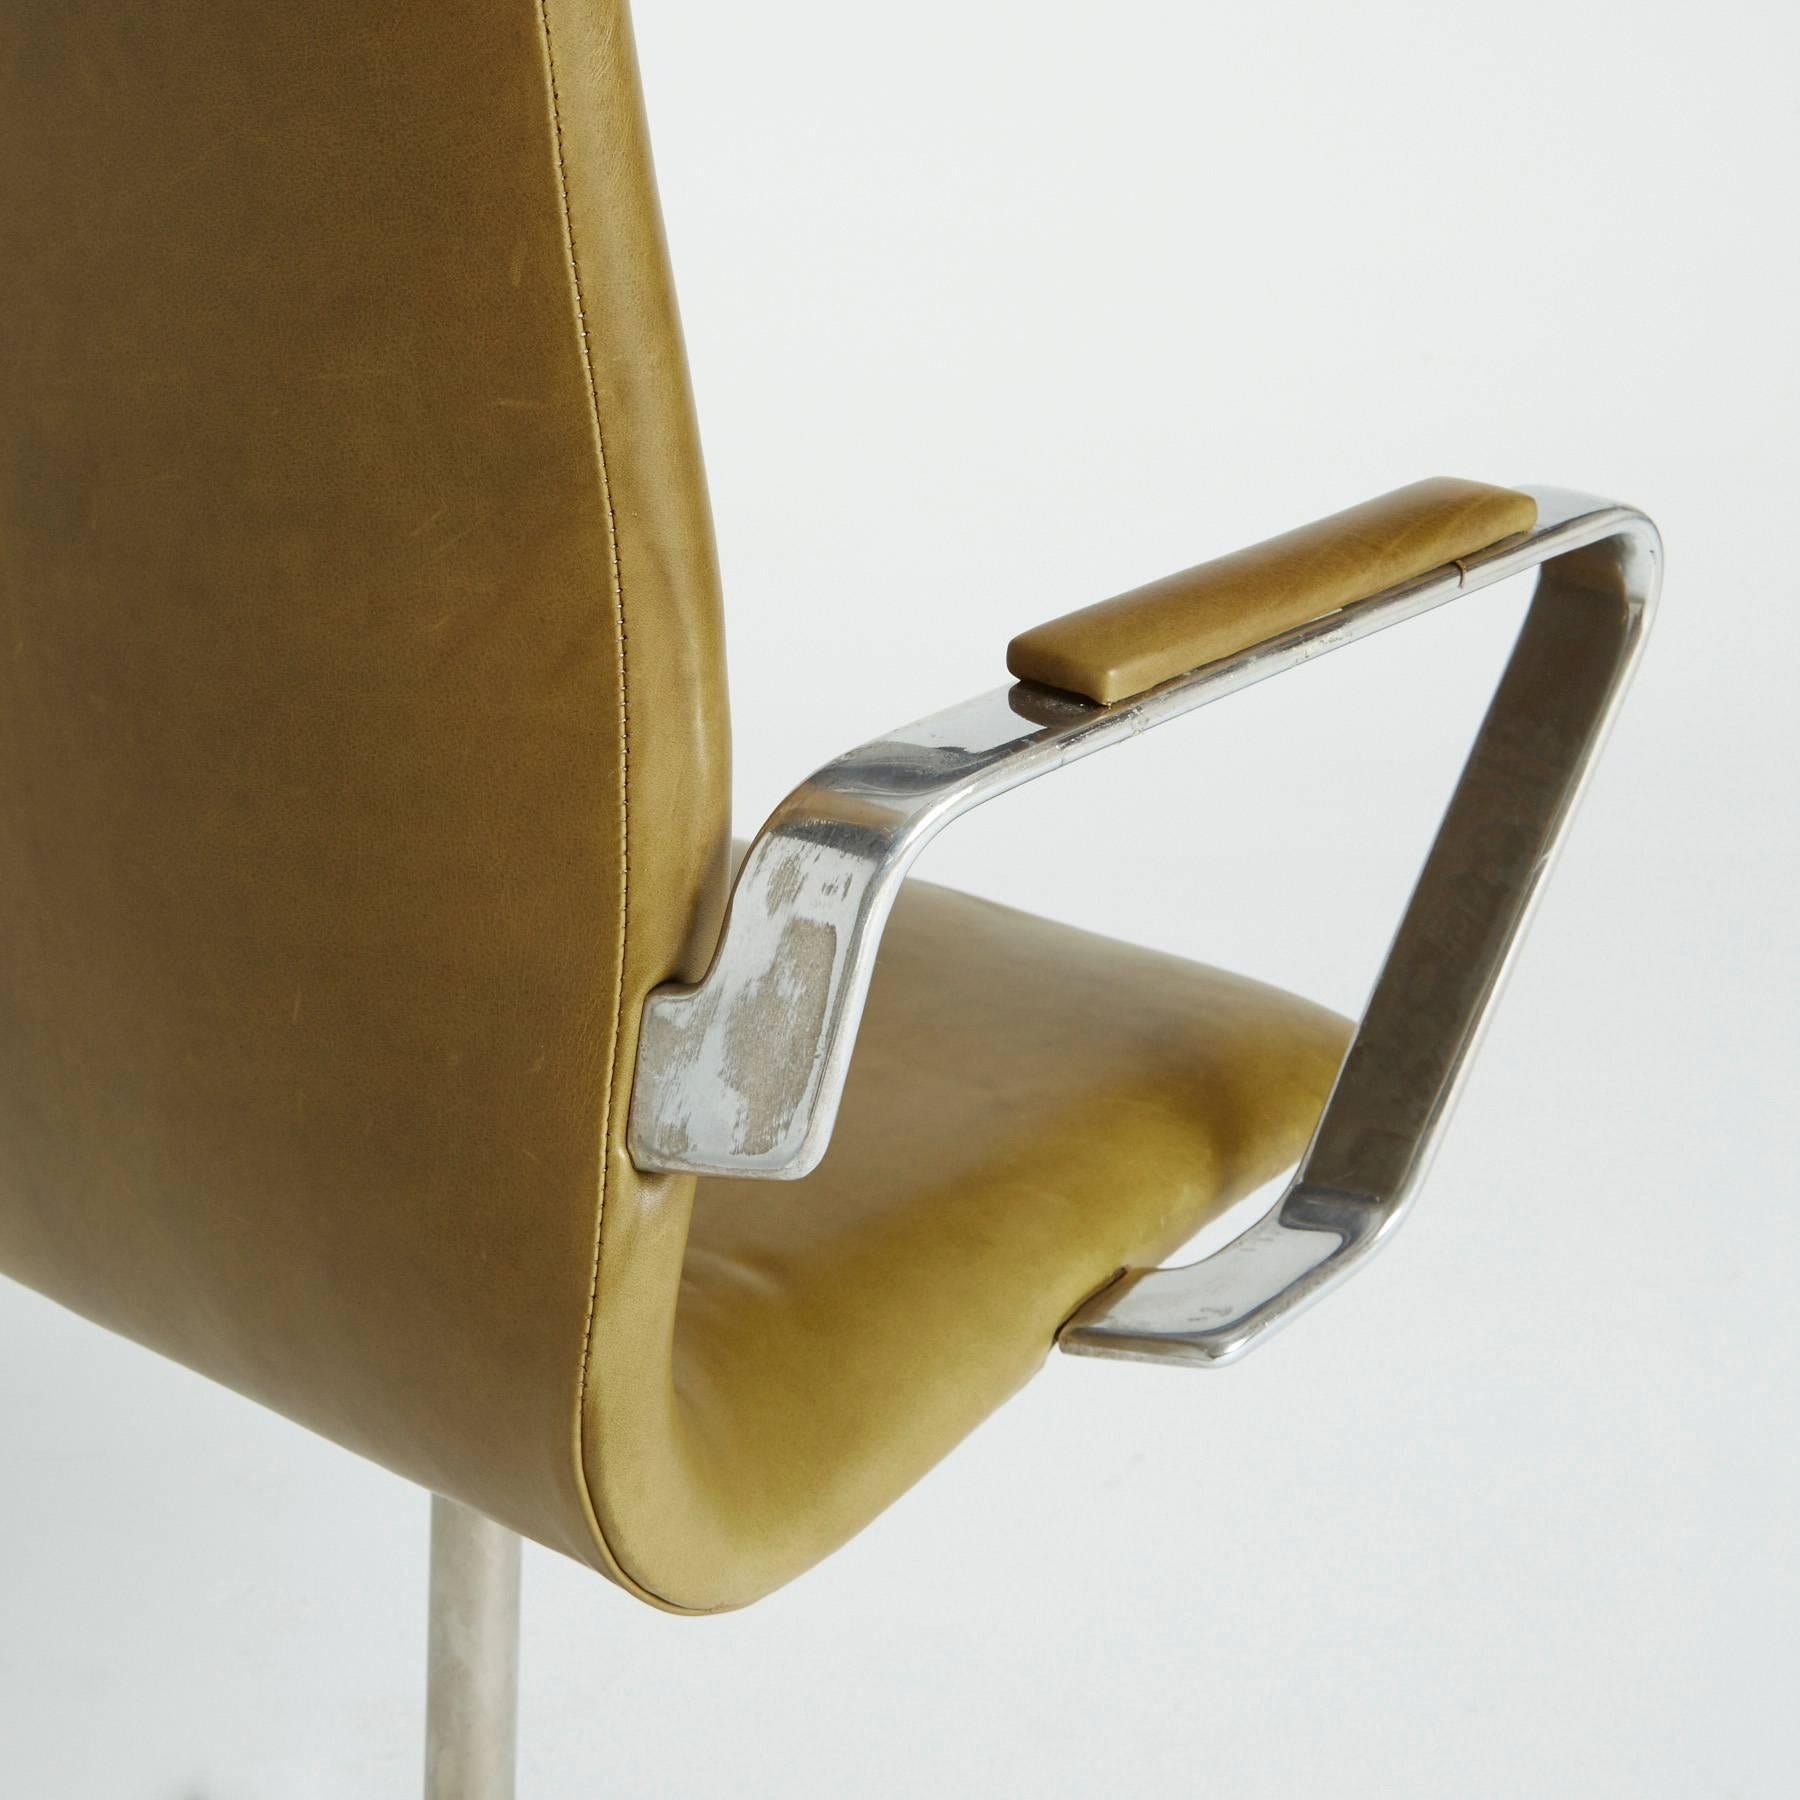 Mid-Century Modern Leather Oxford Swivel Chairs by Arne Jacobsen for Fritz Hansen, 1973, Signed